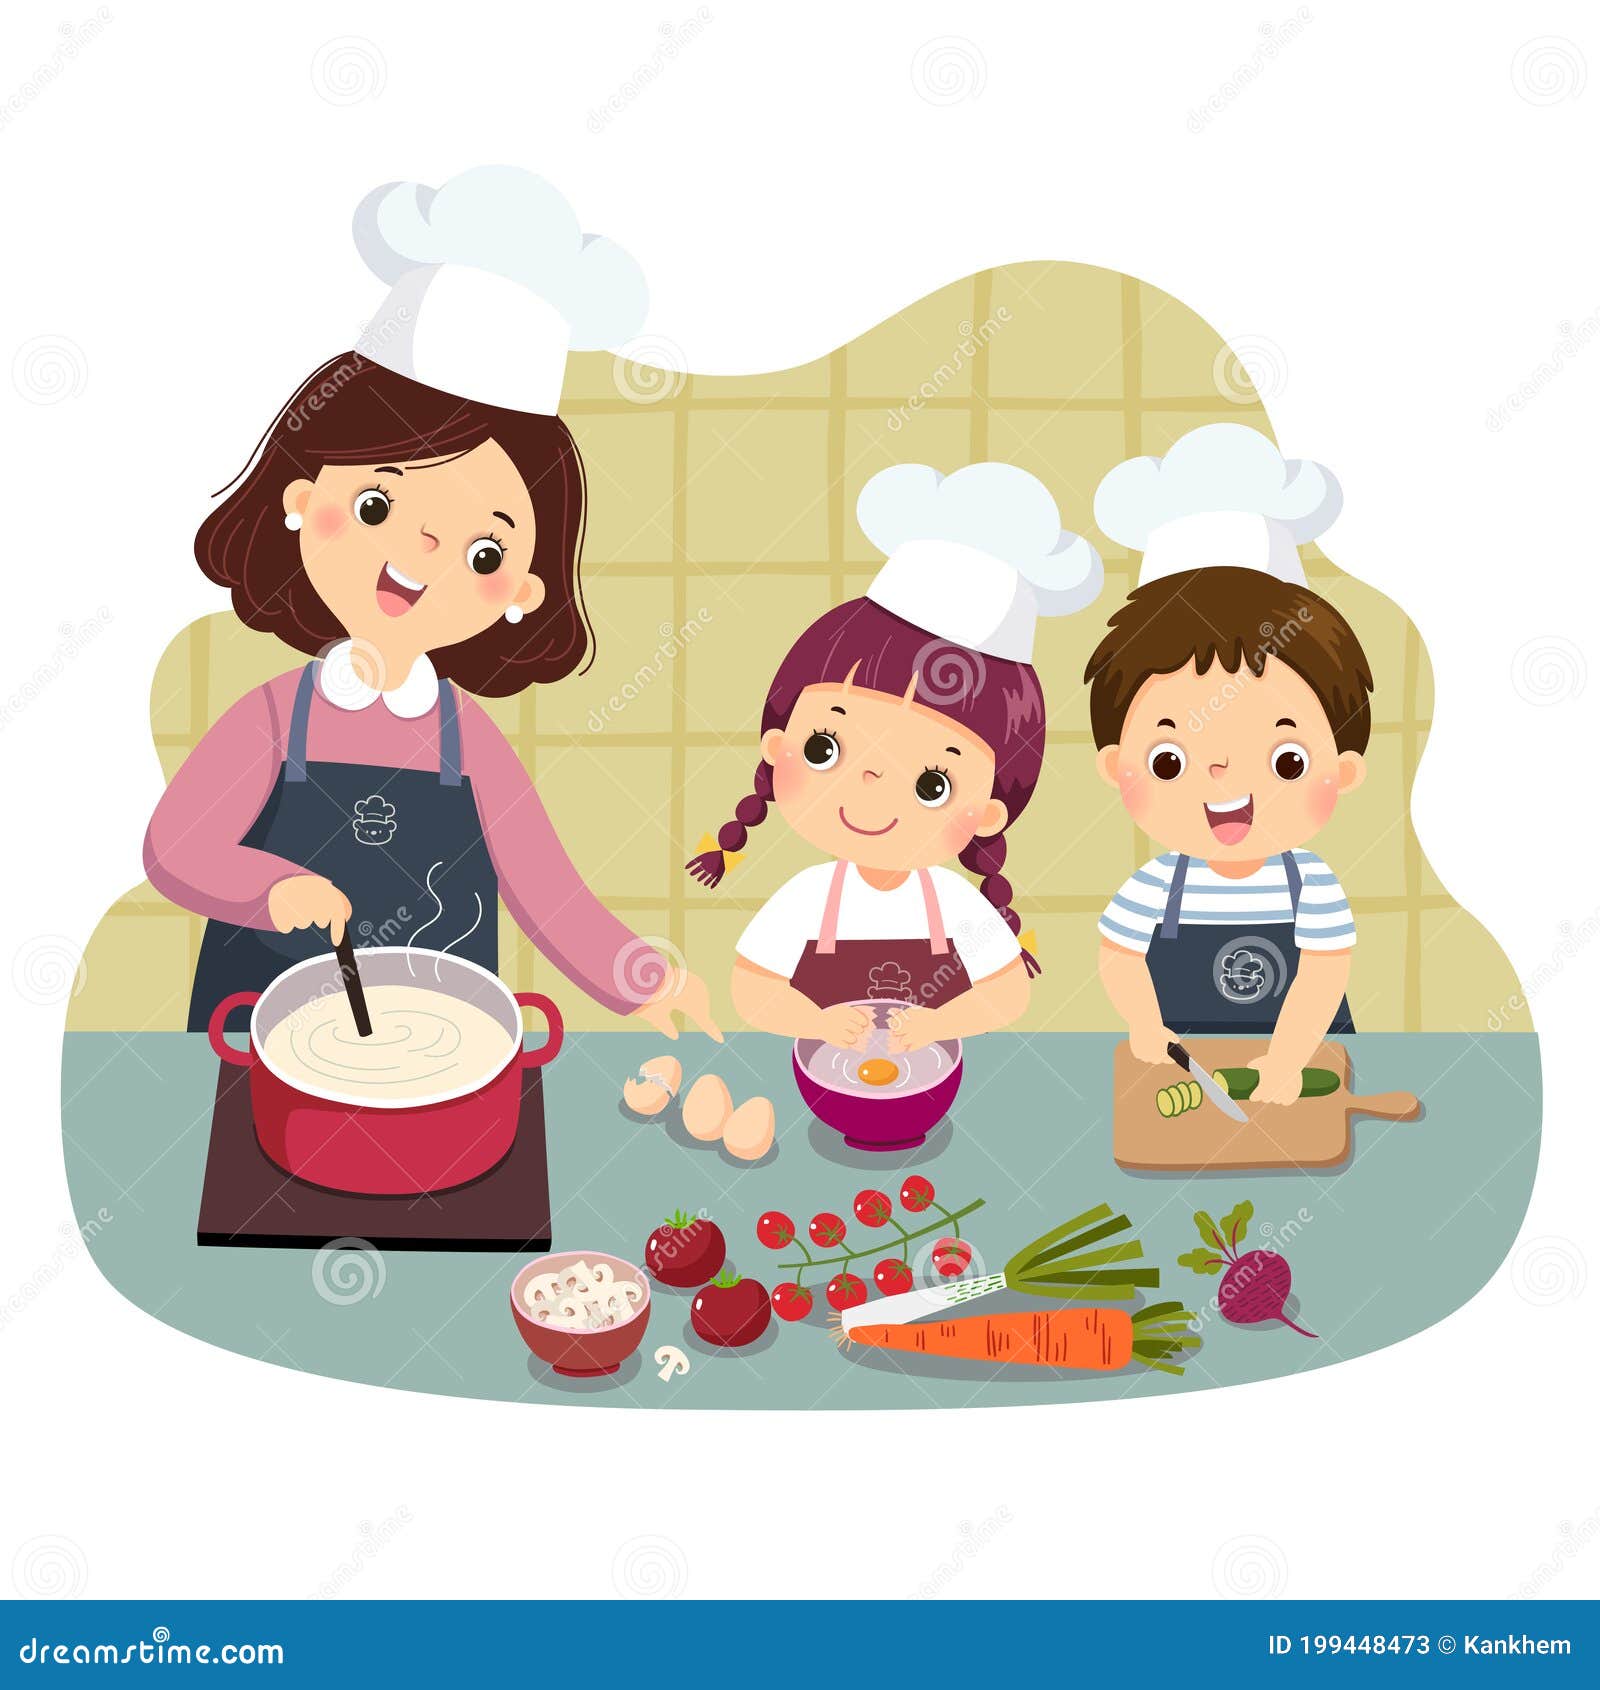 cartoon of mother and children cooking at kitchen counter. kids doing housework chores at home concept